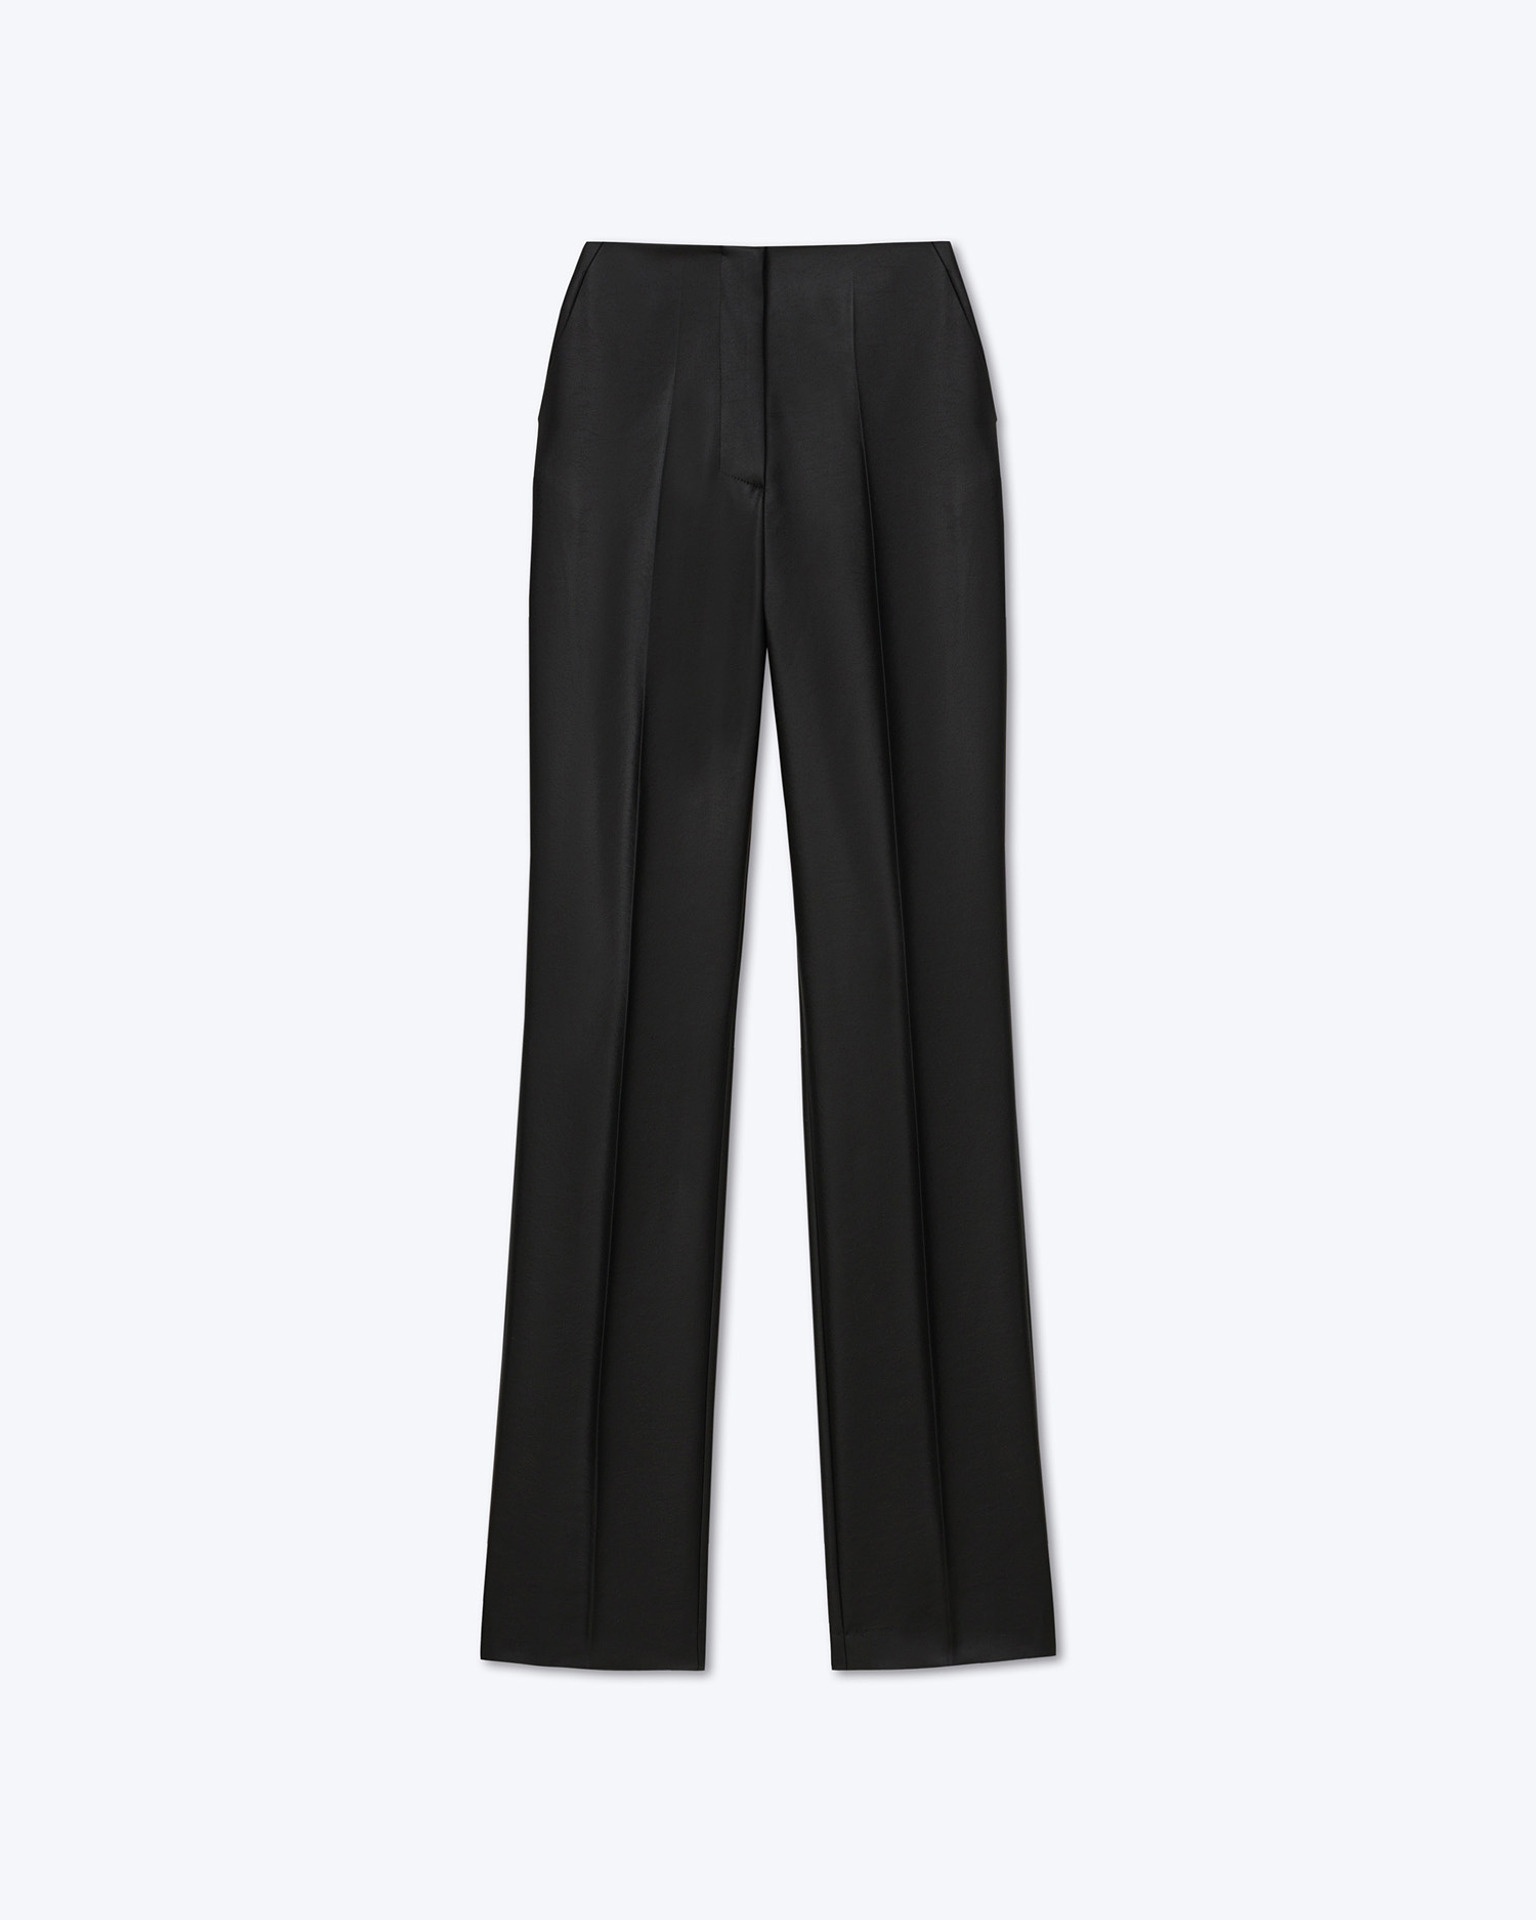 MAURIE - Tailored satin pants - Black - 1